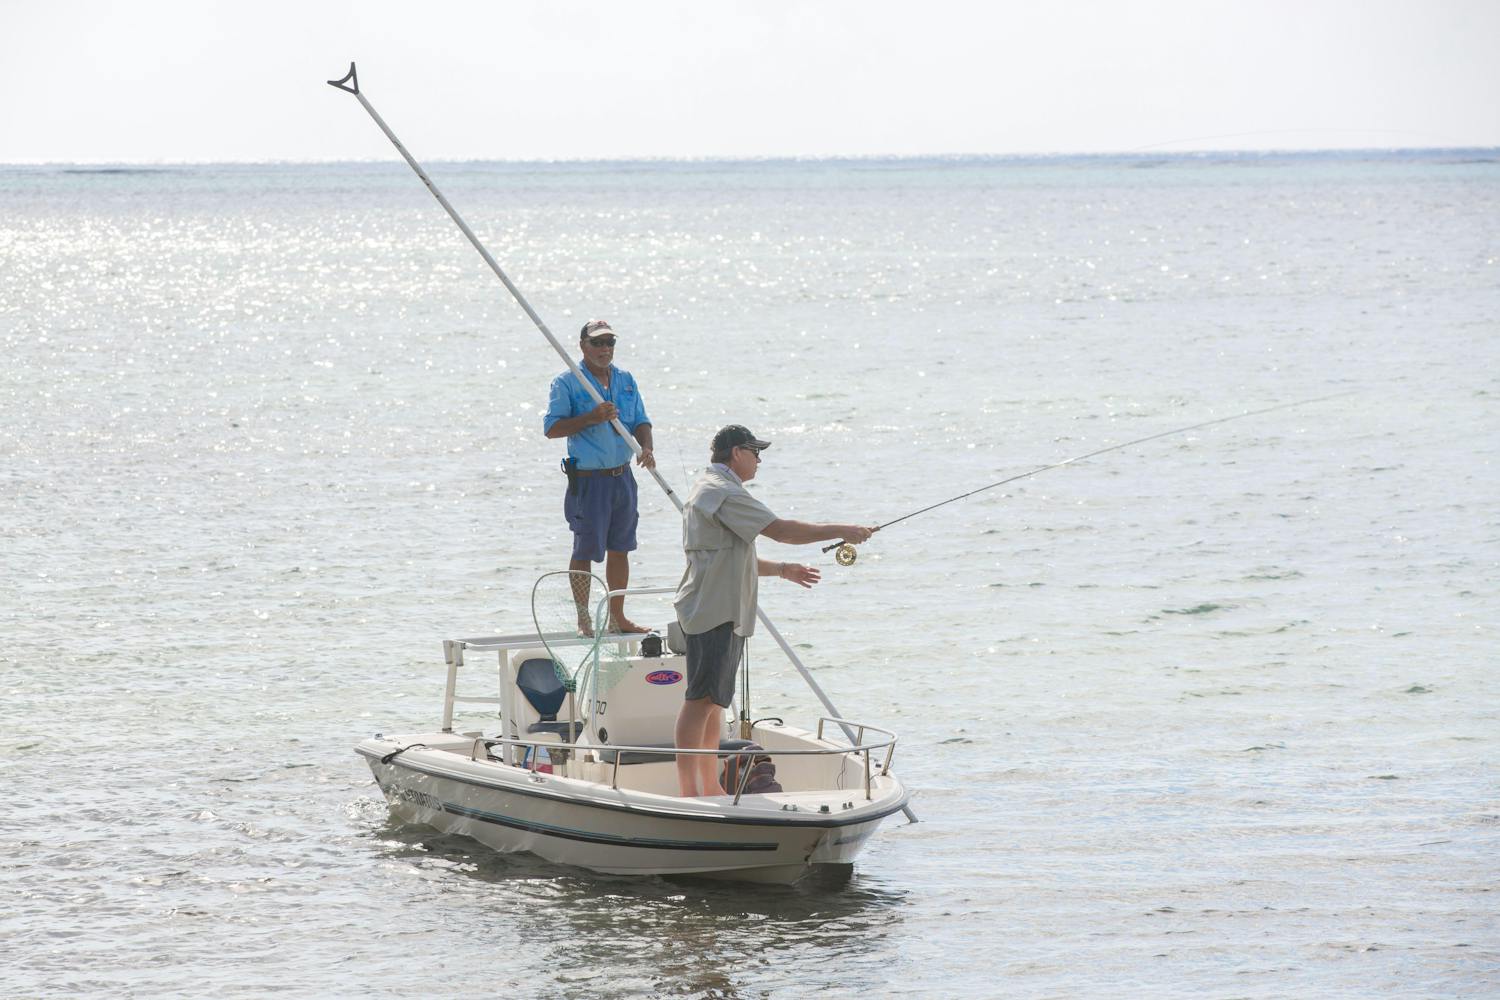 Two men fly fishing off small boat